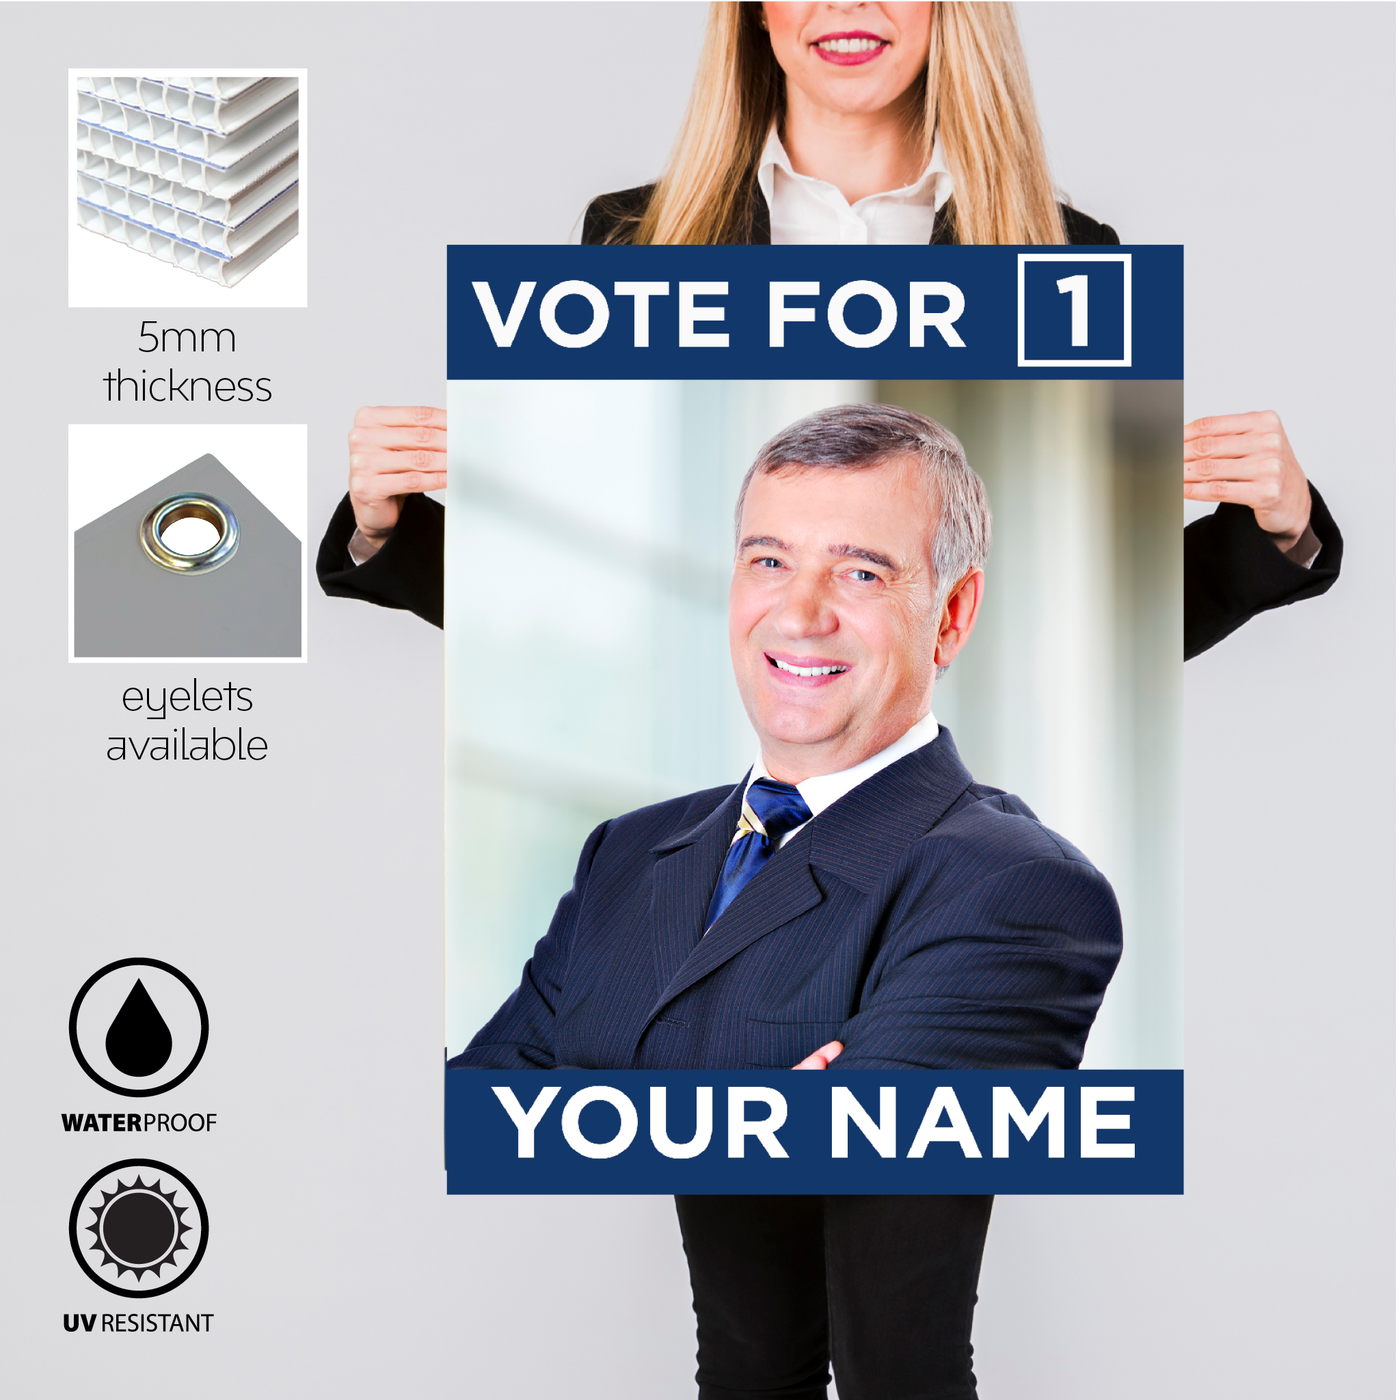 Plastic Election Corflute Signs appx 900x1200mm